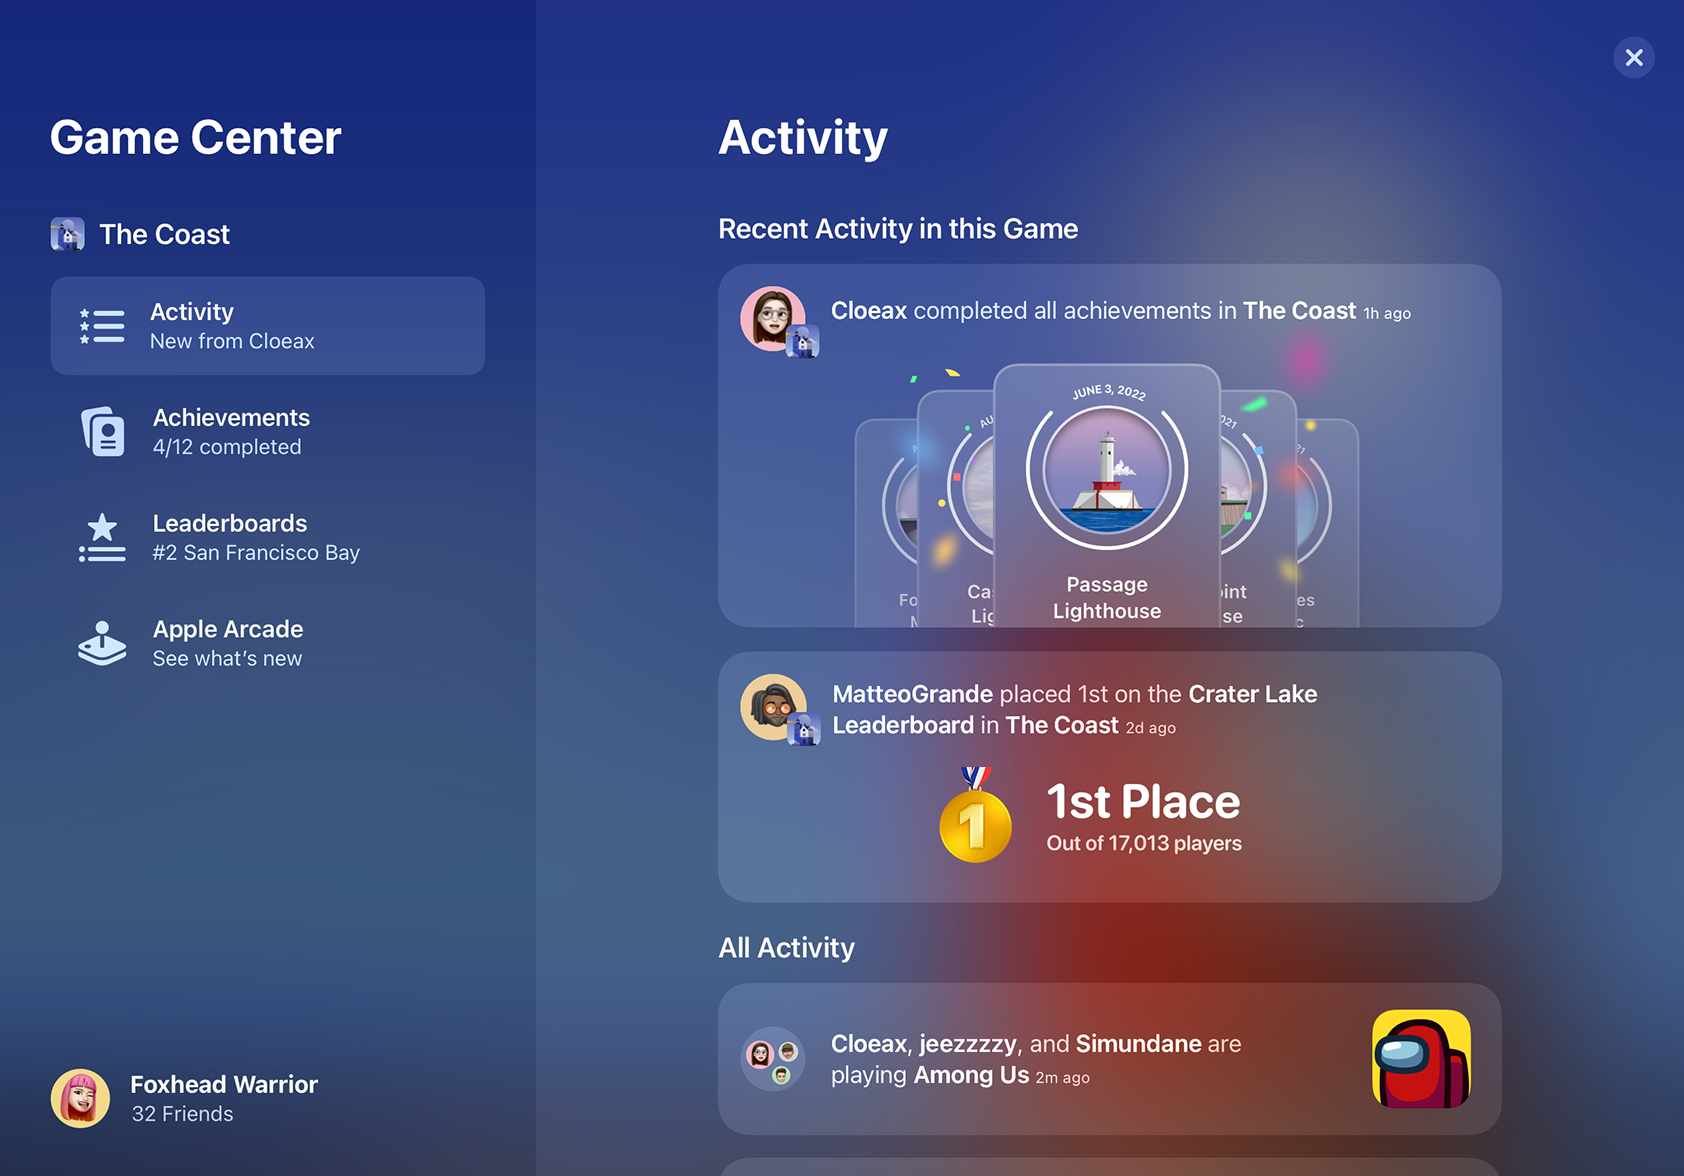 iPad Pro displaying recent Activity in Game Center